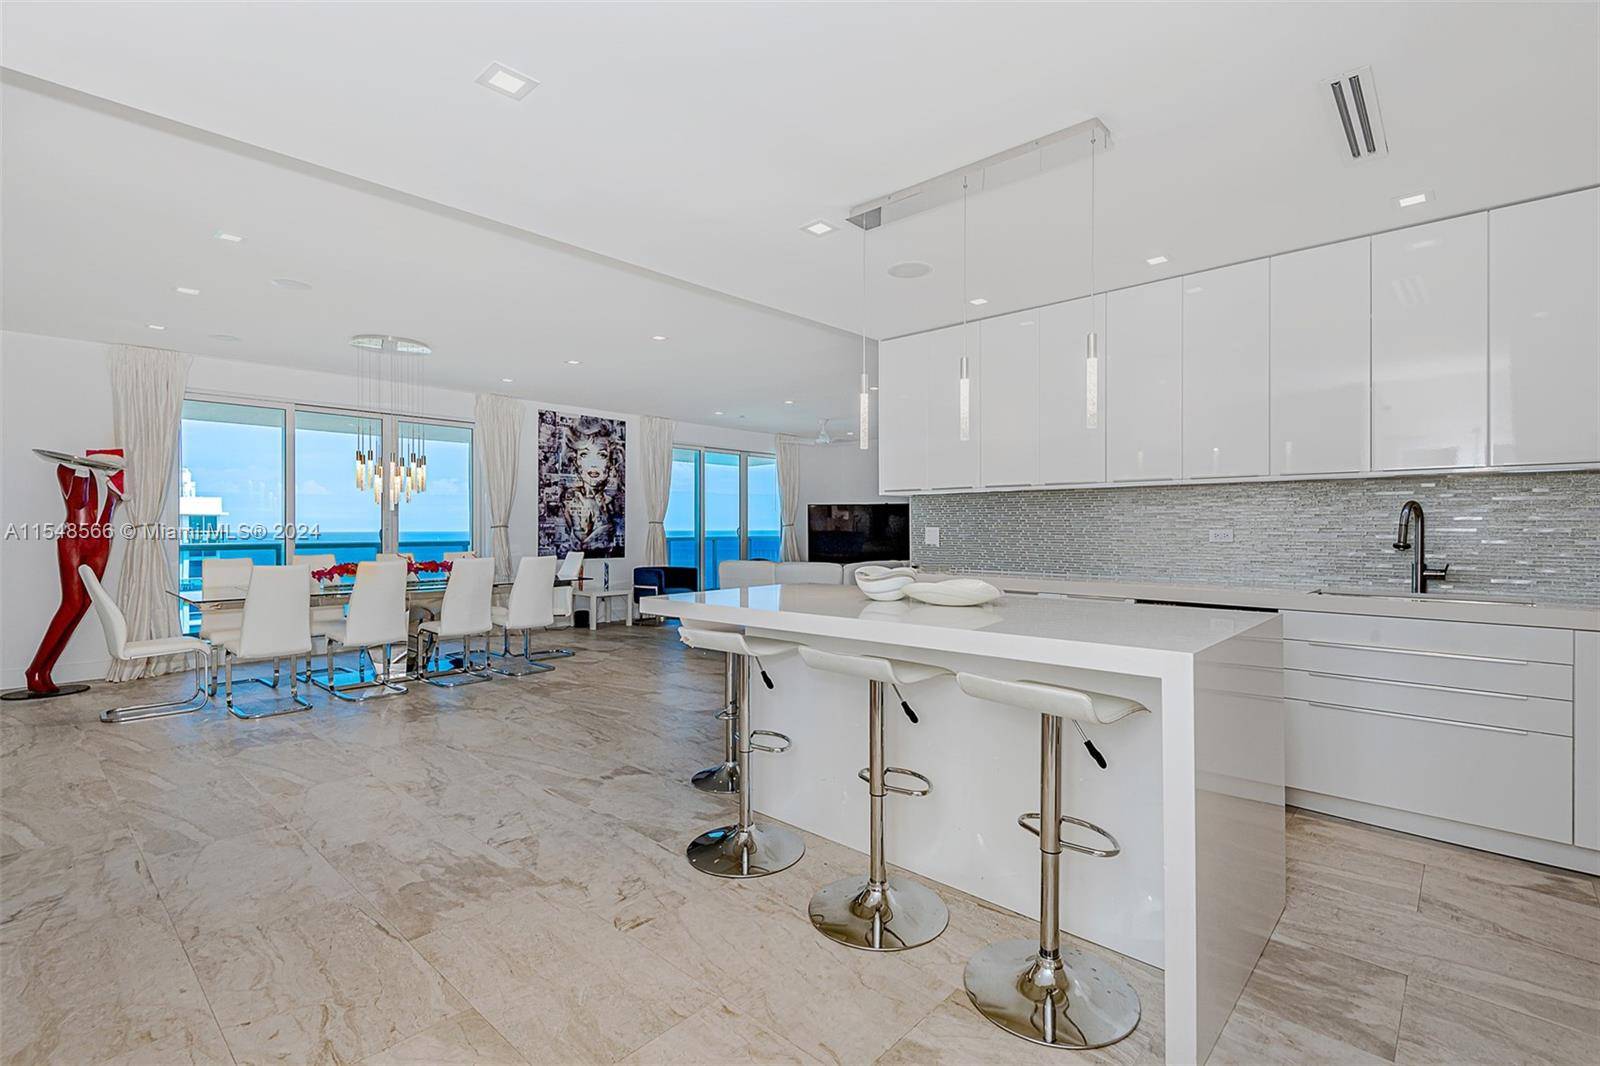 Live Large with 2, 520 sq ft of living space and experience unmatched luxury in this exquisite 4 bedroom, 4 bathroom corner penthouse for rent, featuring balconies and mesmerizing ocean ...